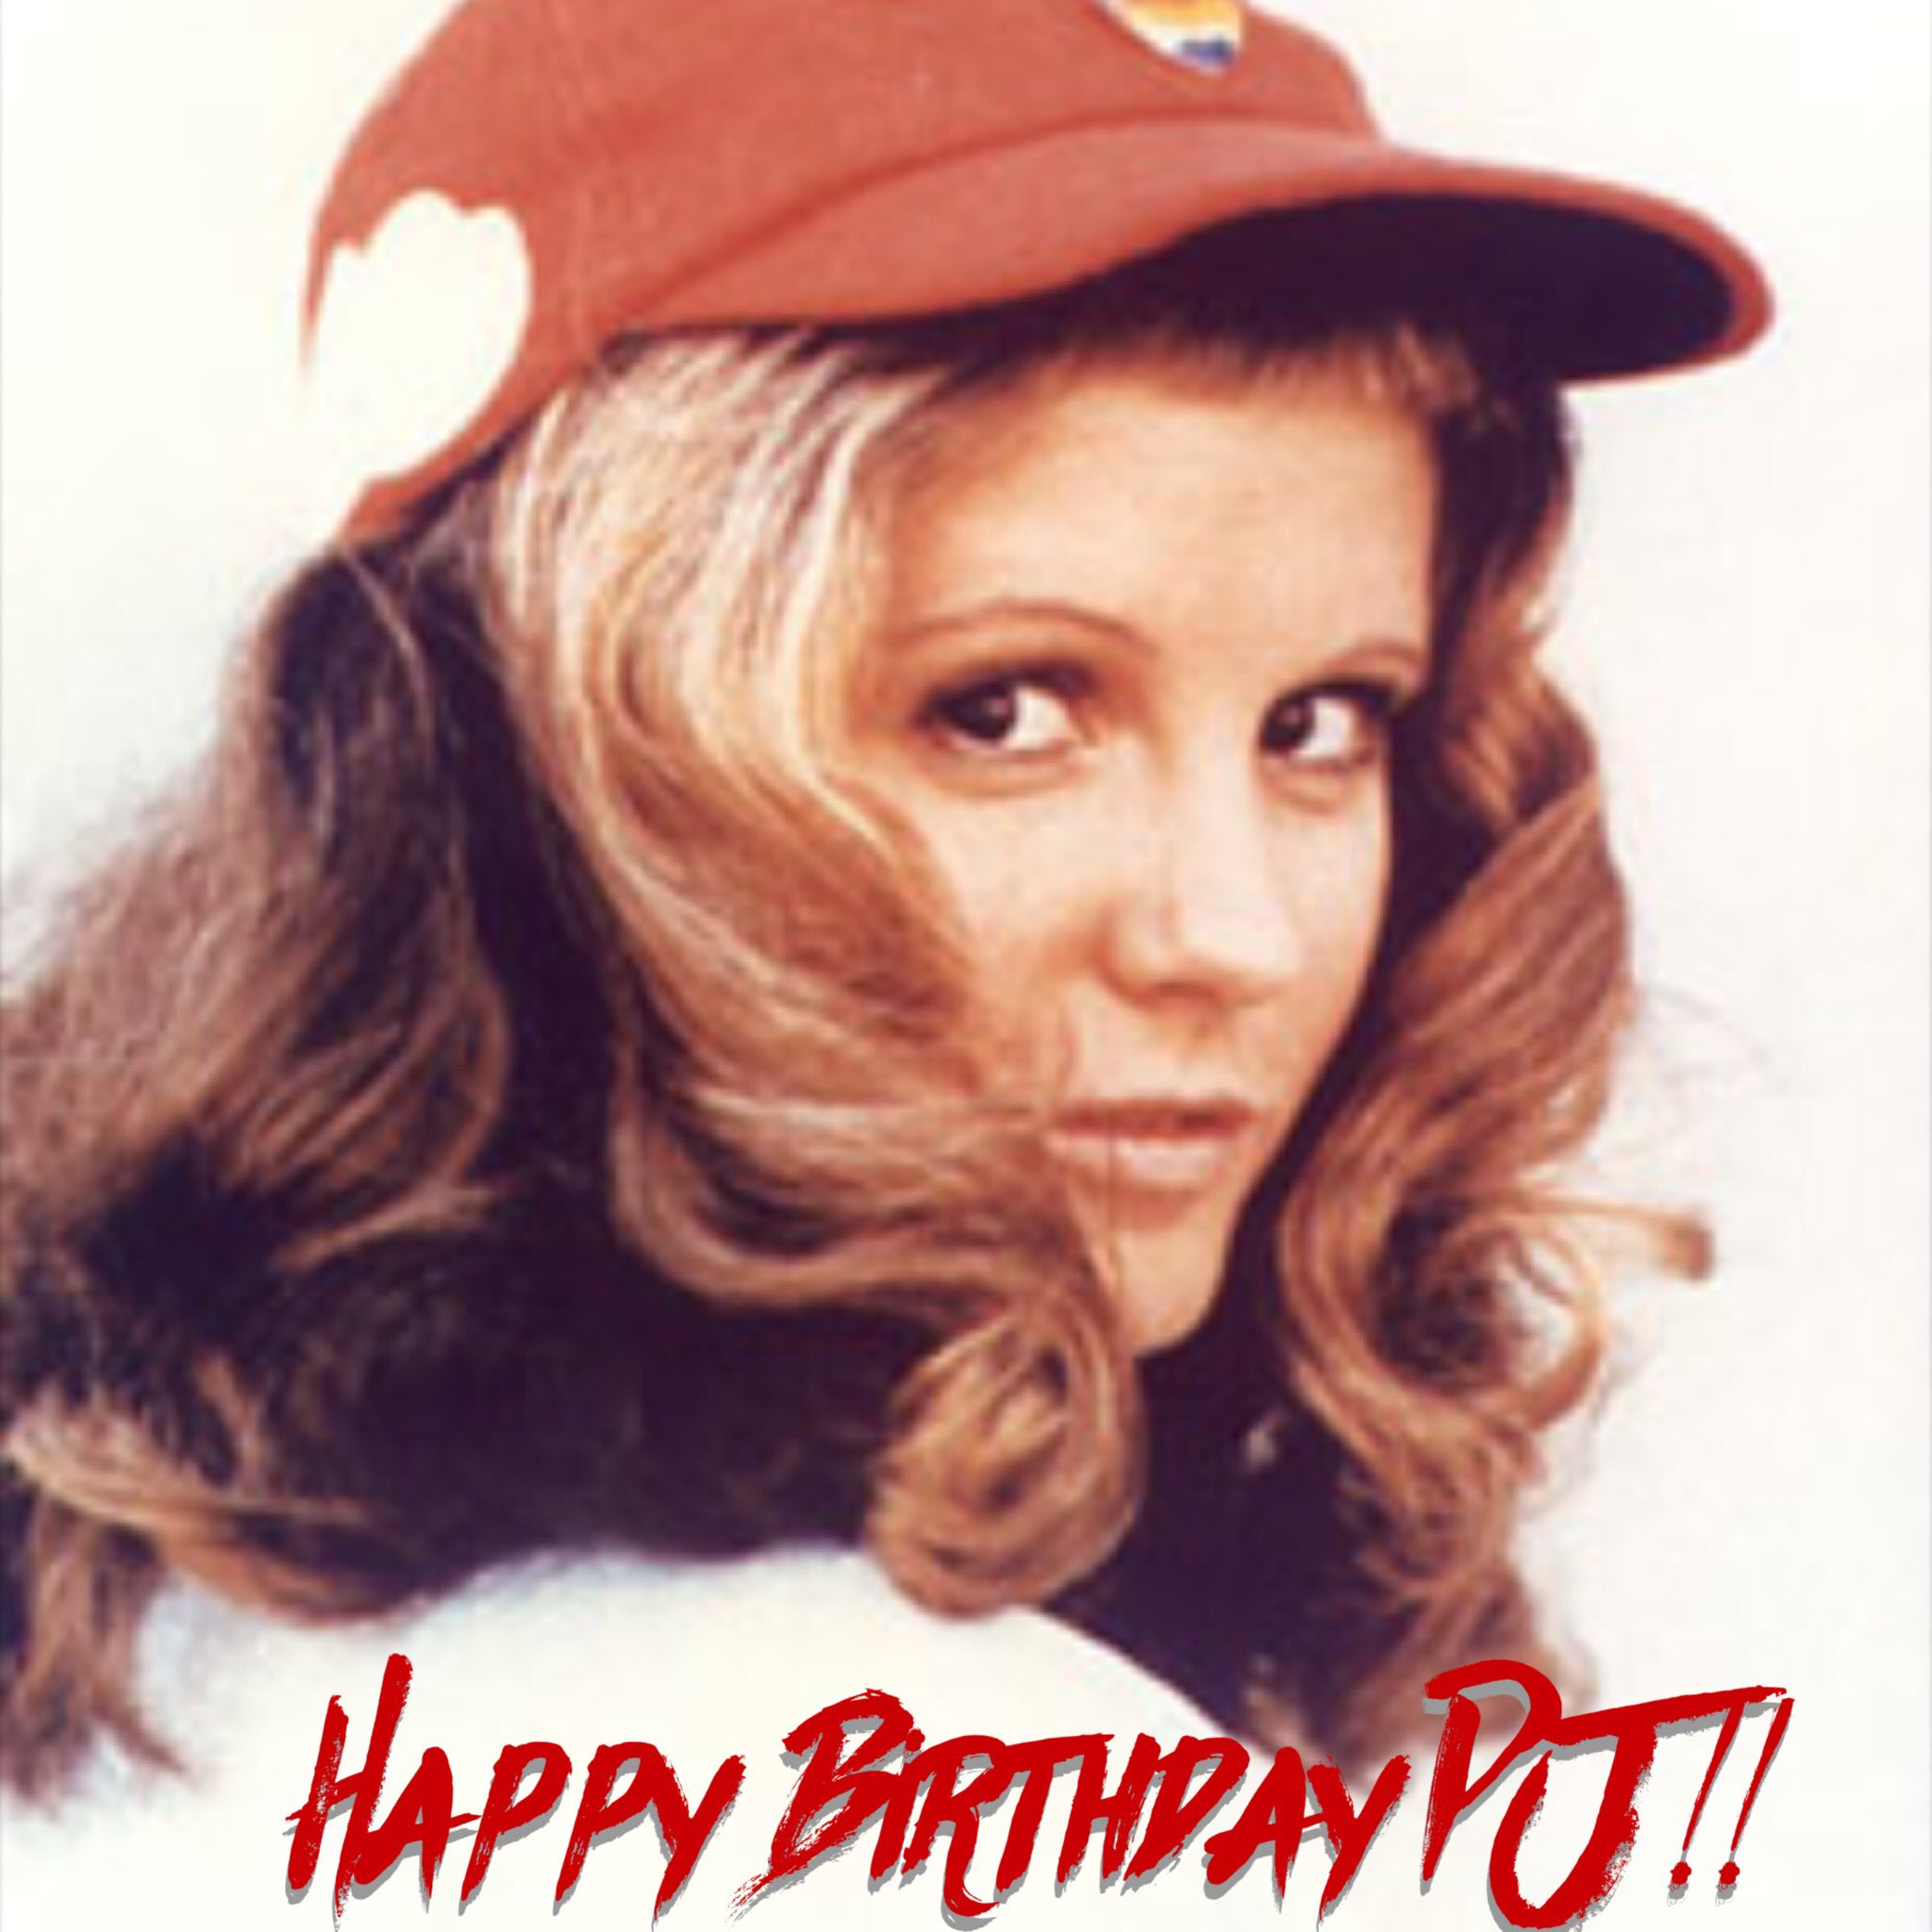 Can\t forget PJ SOLES! Happy Birthday    